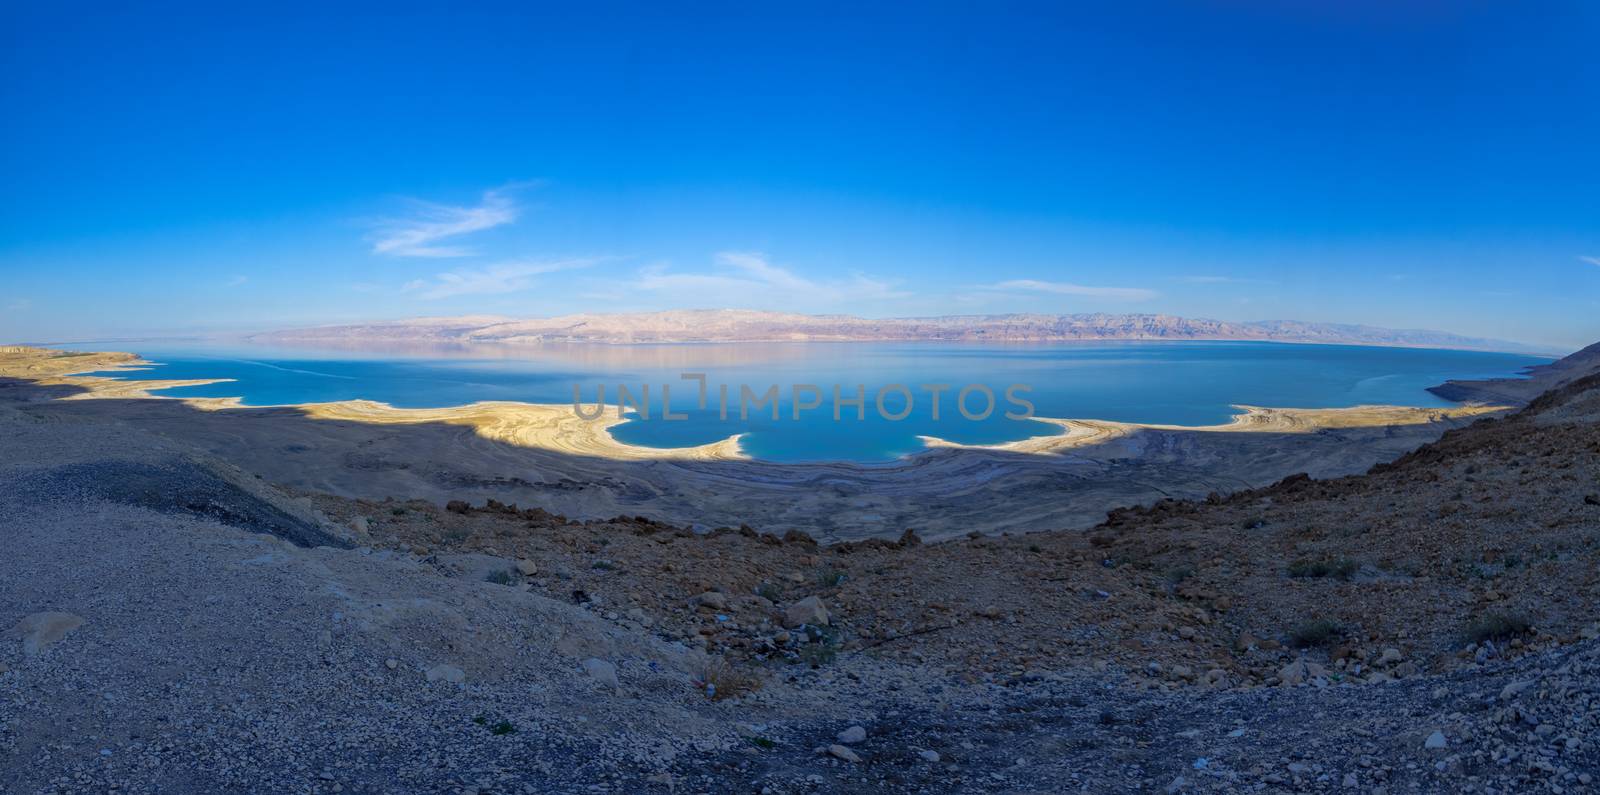 Panoramic landscape of the coastline of the Dead Sea by RnDmS